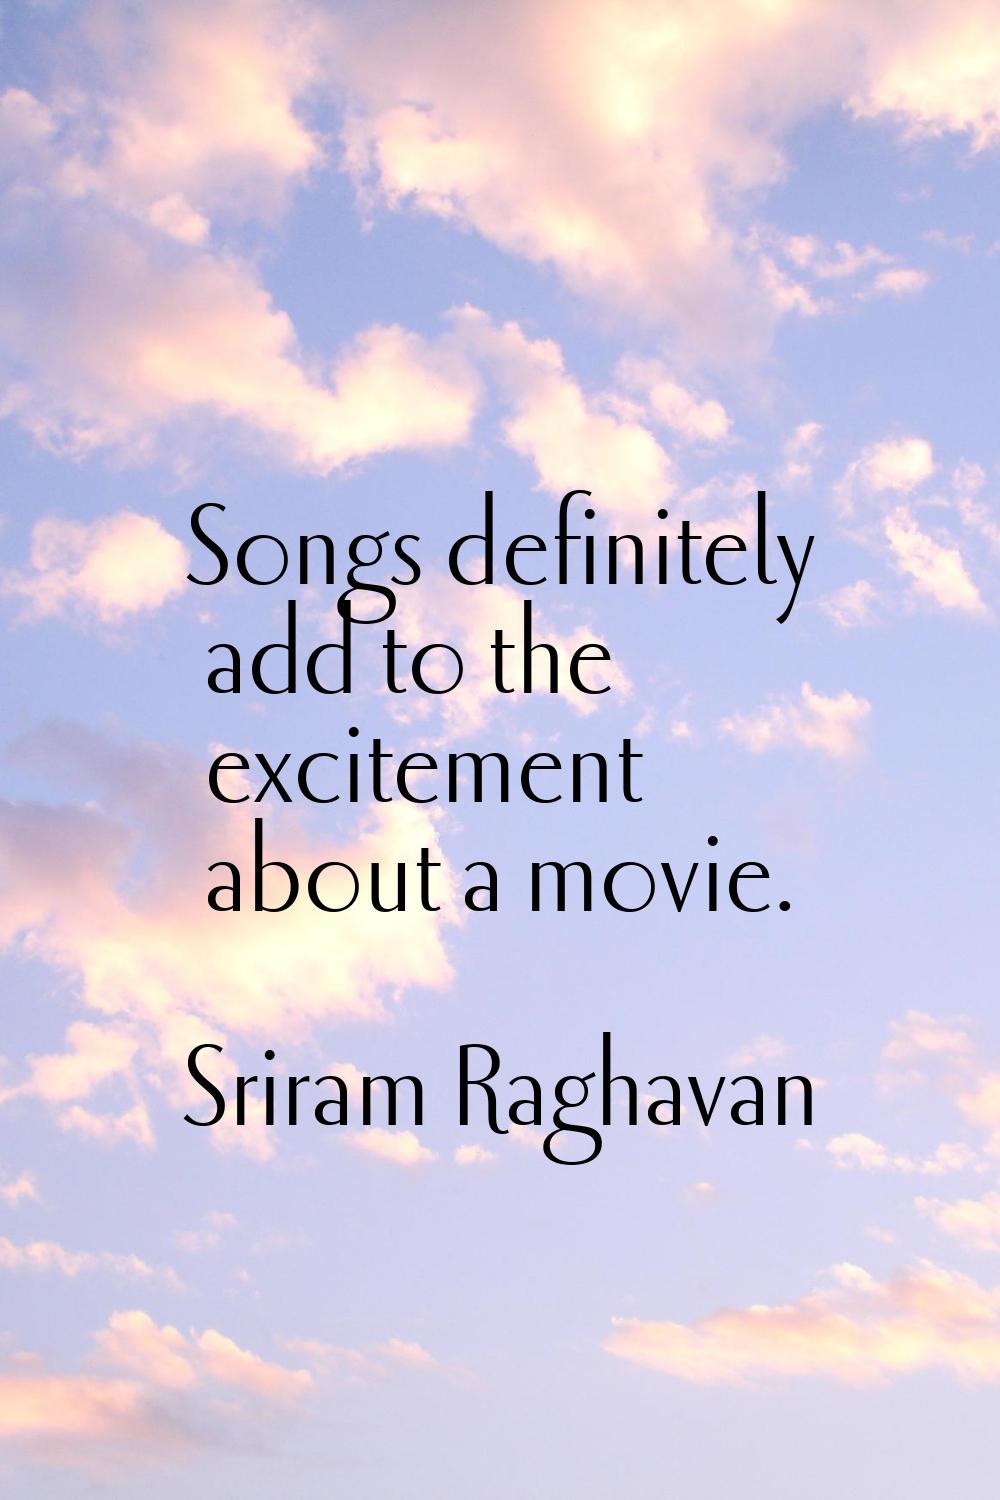 Songs definitely add to the excitement about a movie.